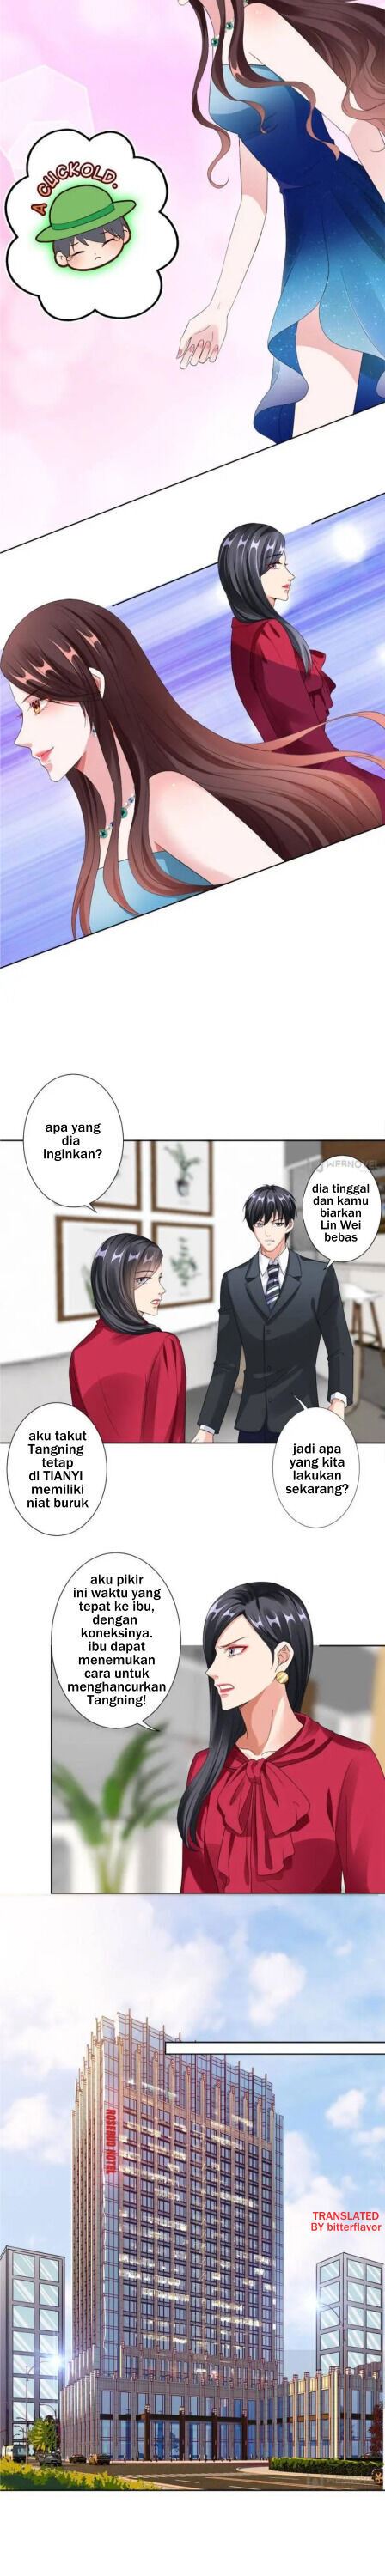 Trial Marriage Husband: Need to Work Hard Chapter 42